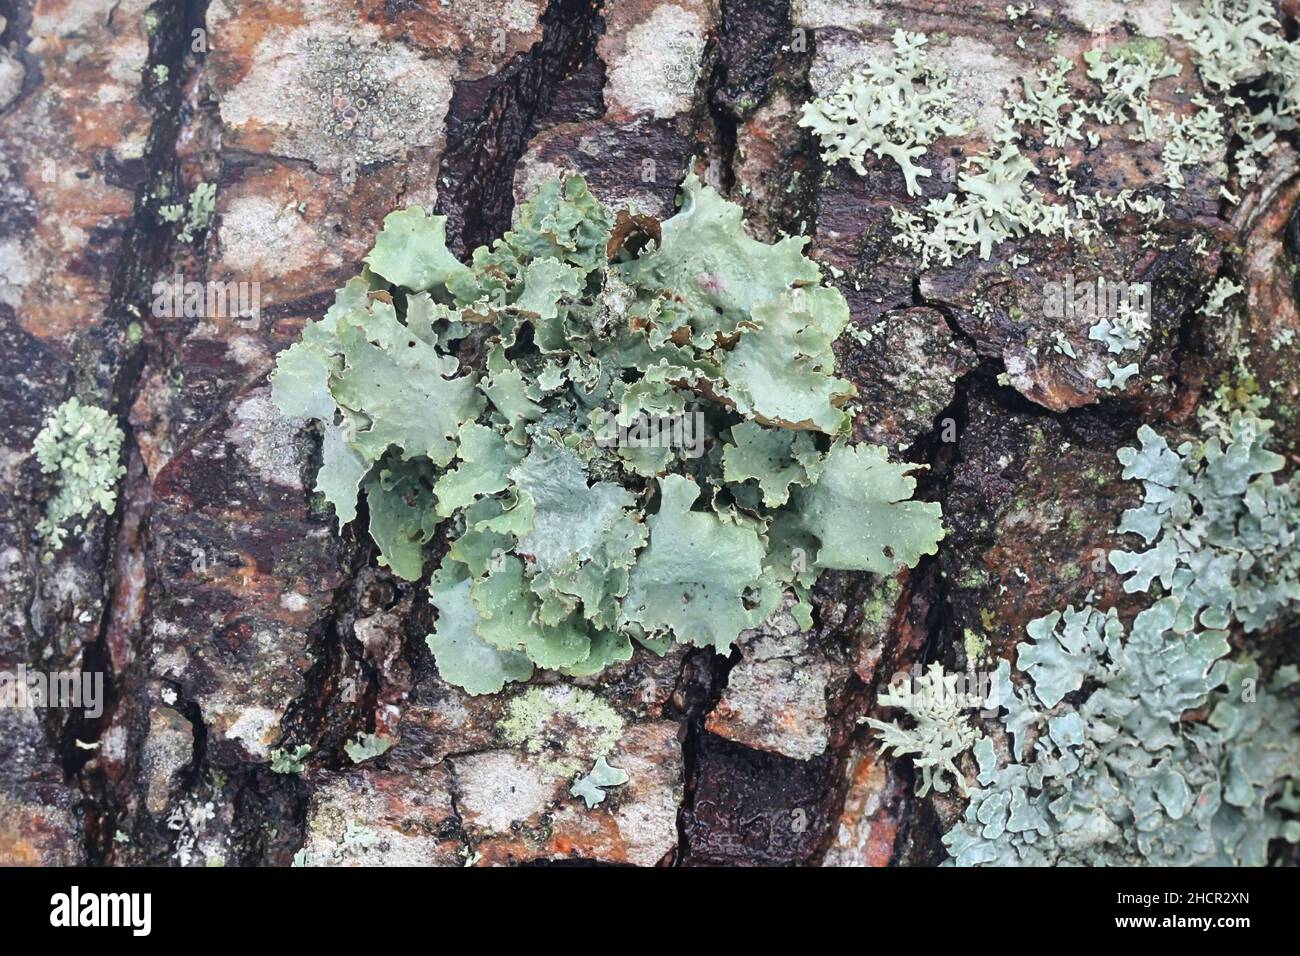 Platismatia glauca, commonly known as ragbag lichen or varied rag lichen Stock Photo